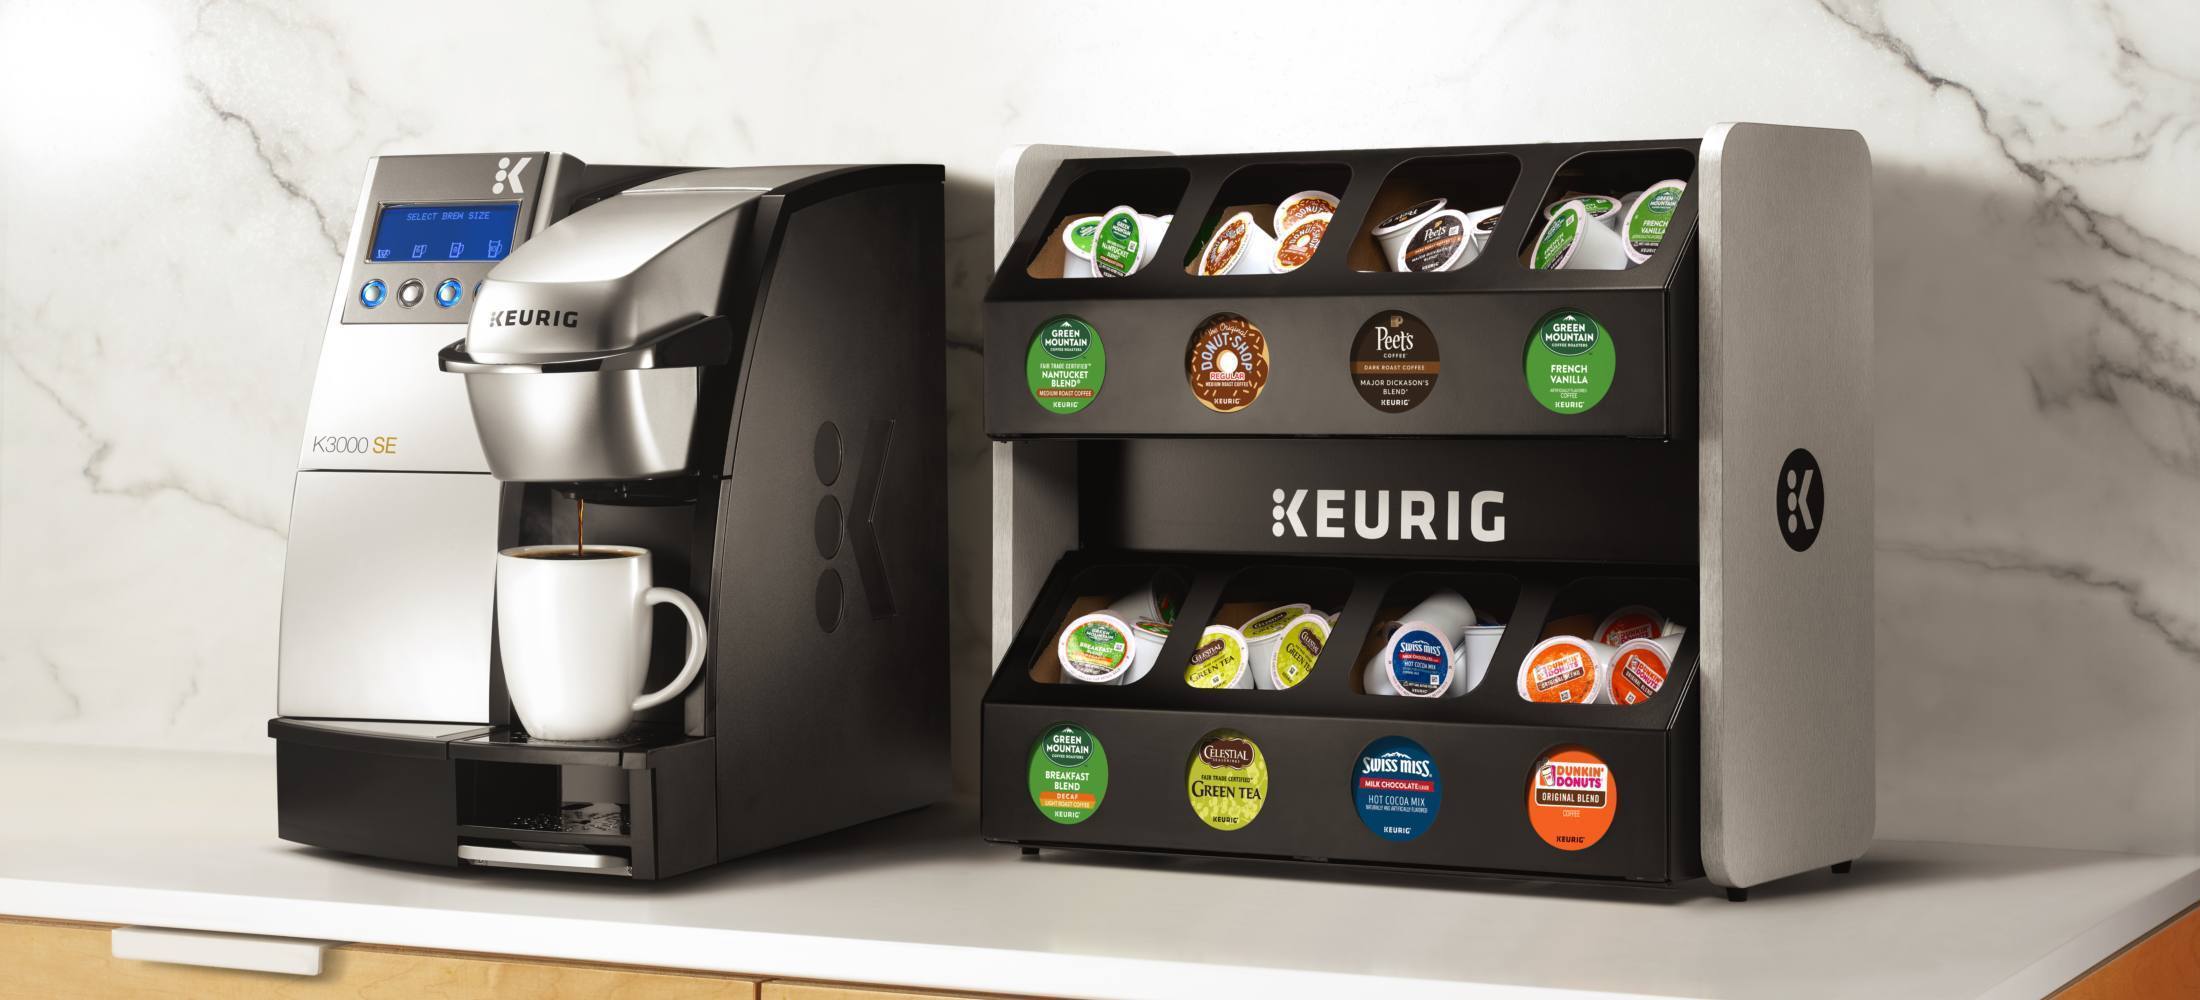 How to Clean and Descale a Keurig Mini